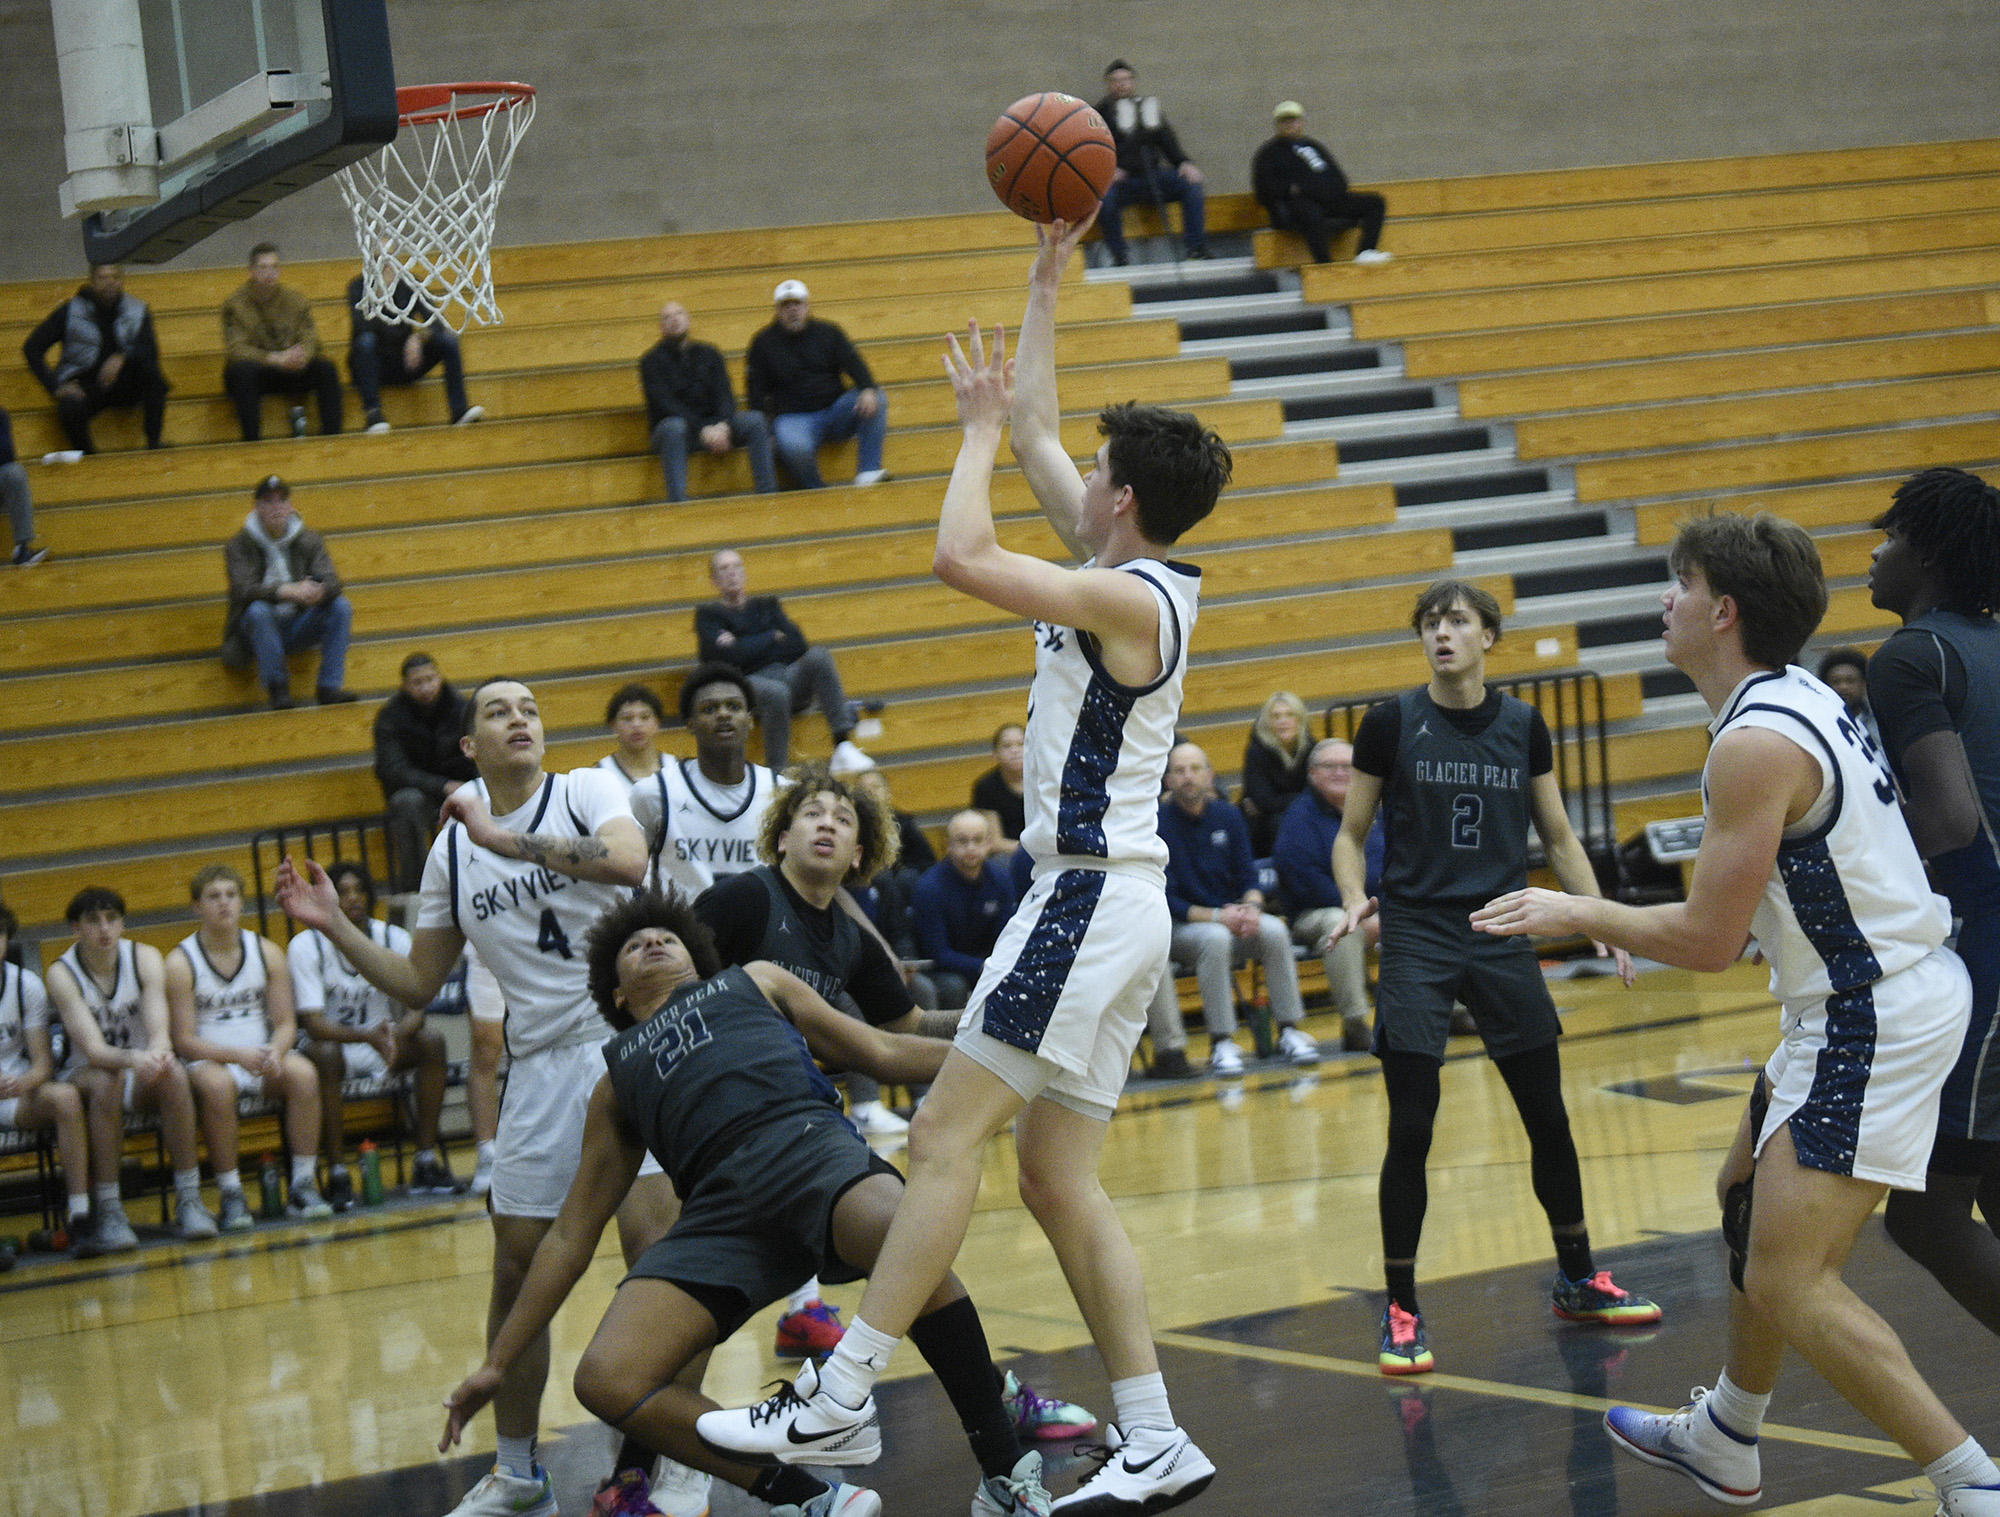 Skyview's Gavin Perdue takes a shot during the Storm's game against Glacier Peak at Skyview High School on Saturday, Dec. 2, 2023.